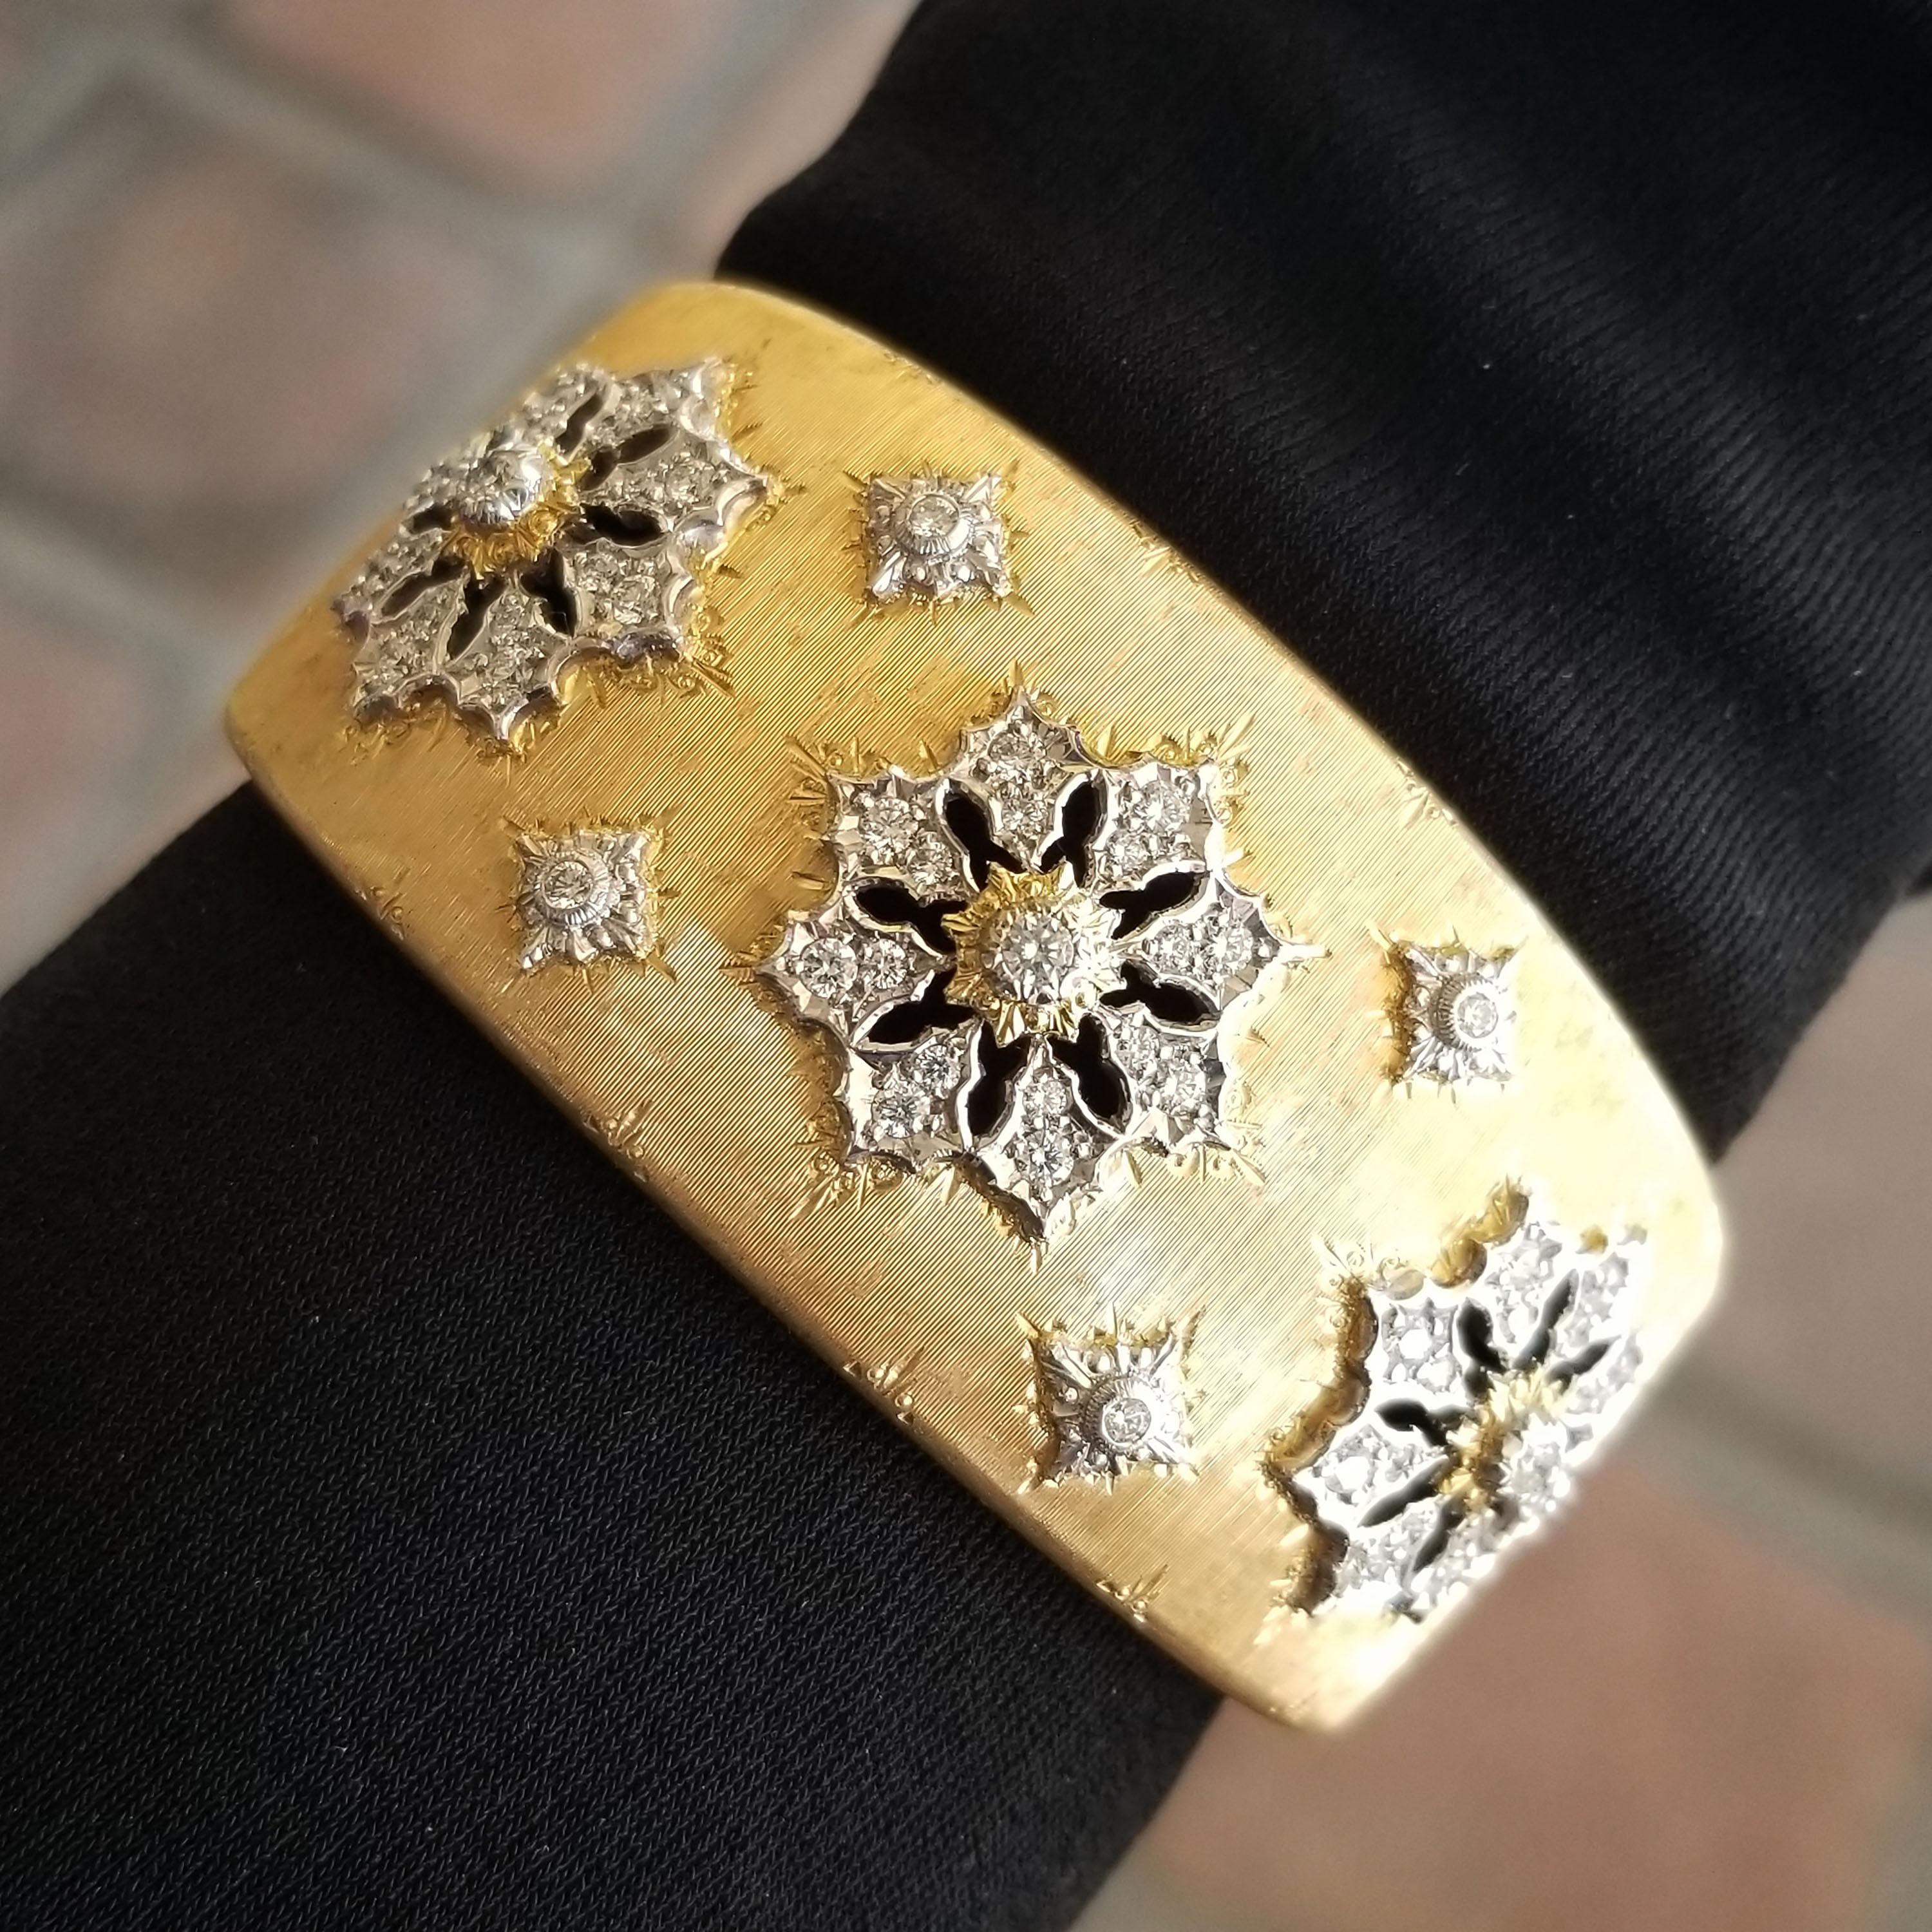 Pieces from the Liliana collection feature a lily of the valley motif, gorgeously executed in 18kt gold and exceptional diamonds. This hinged cuff, with 1.64ct of truly beautiful diamonds, is an exceptional example of an old-world style that is